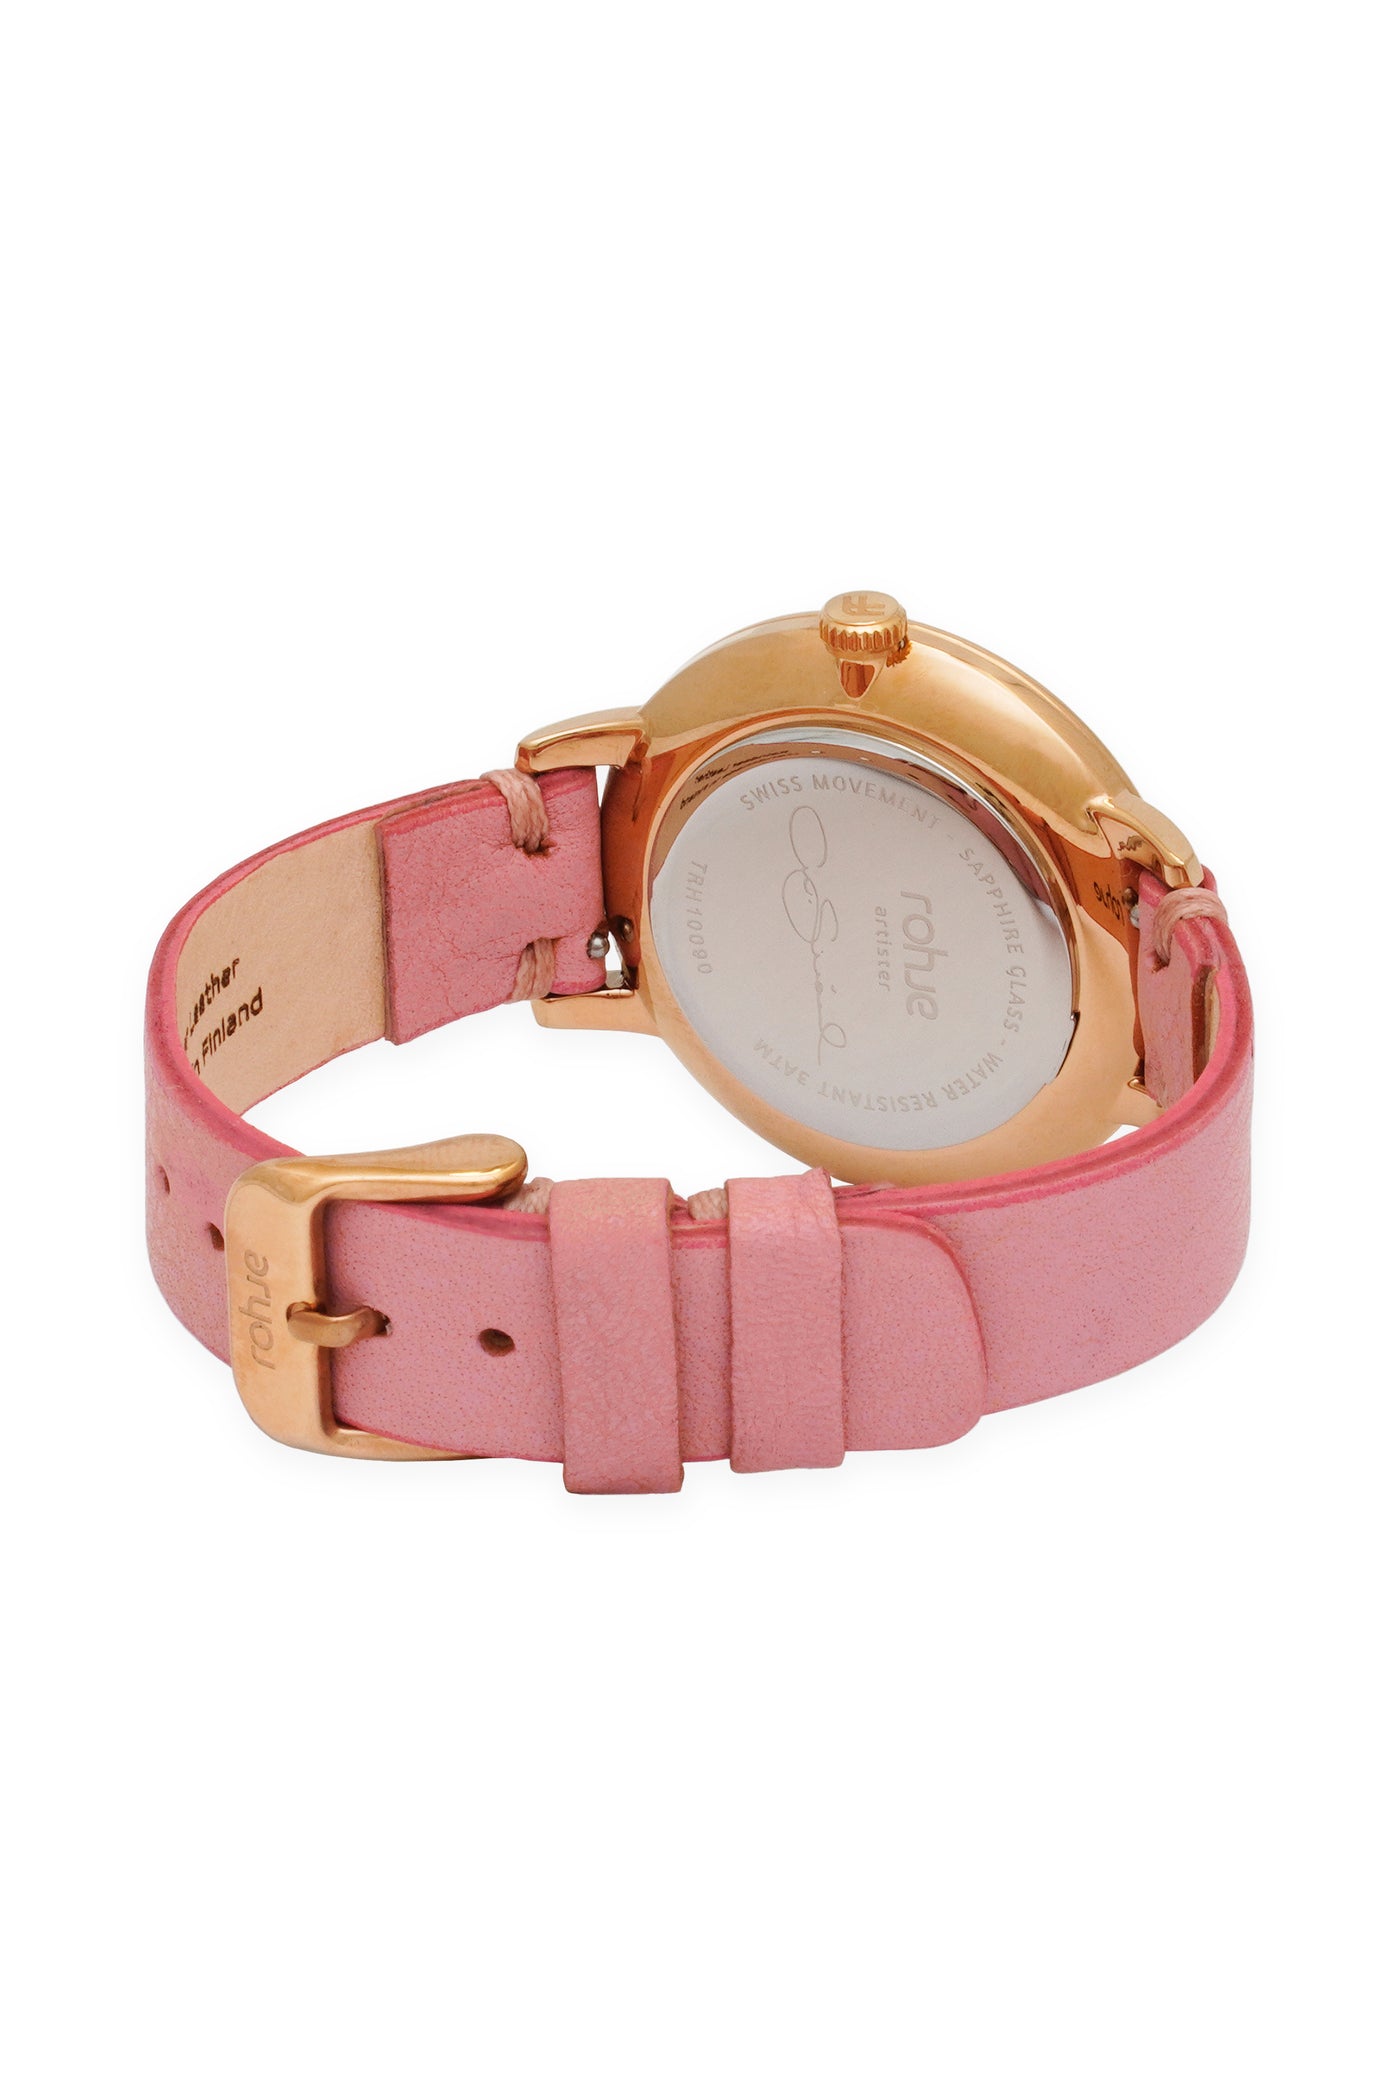 Rohje Artister Dreamy Pink Leather strap #strap_pink-reindeer-leather